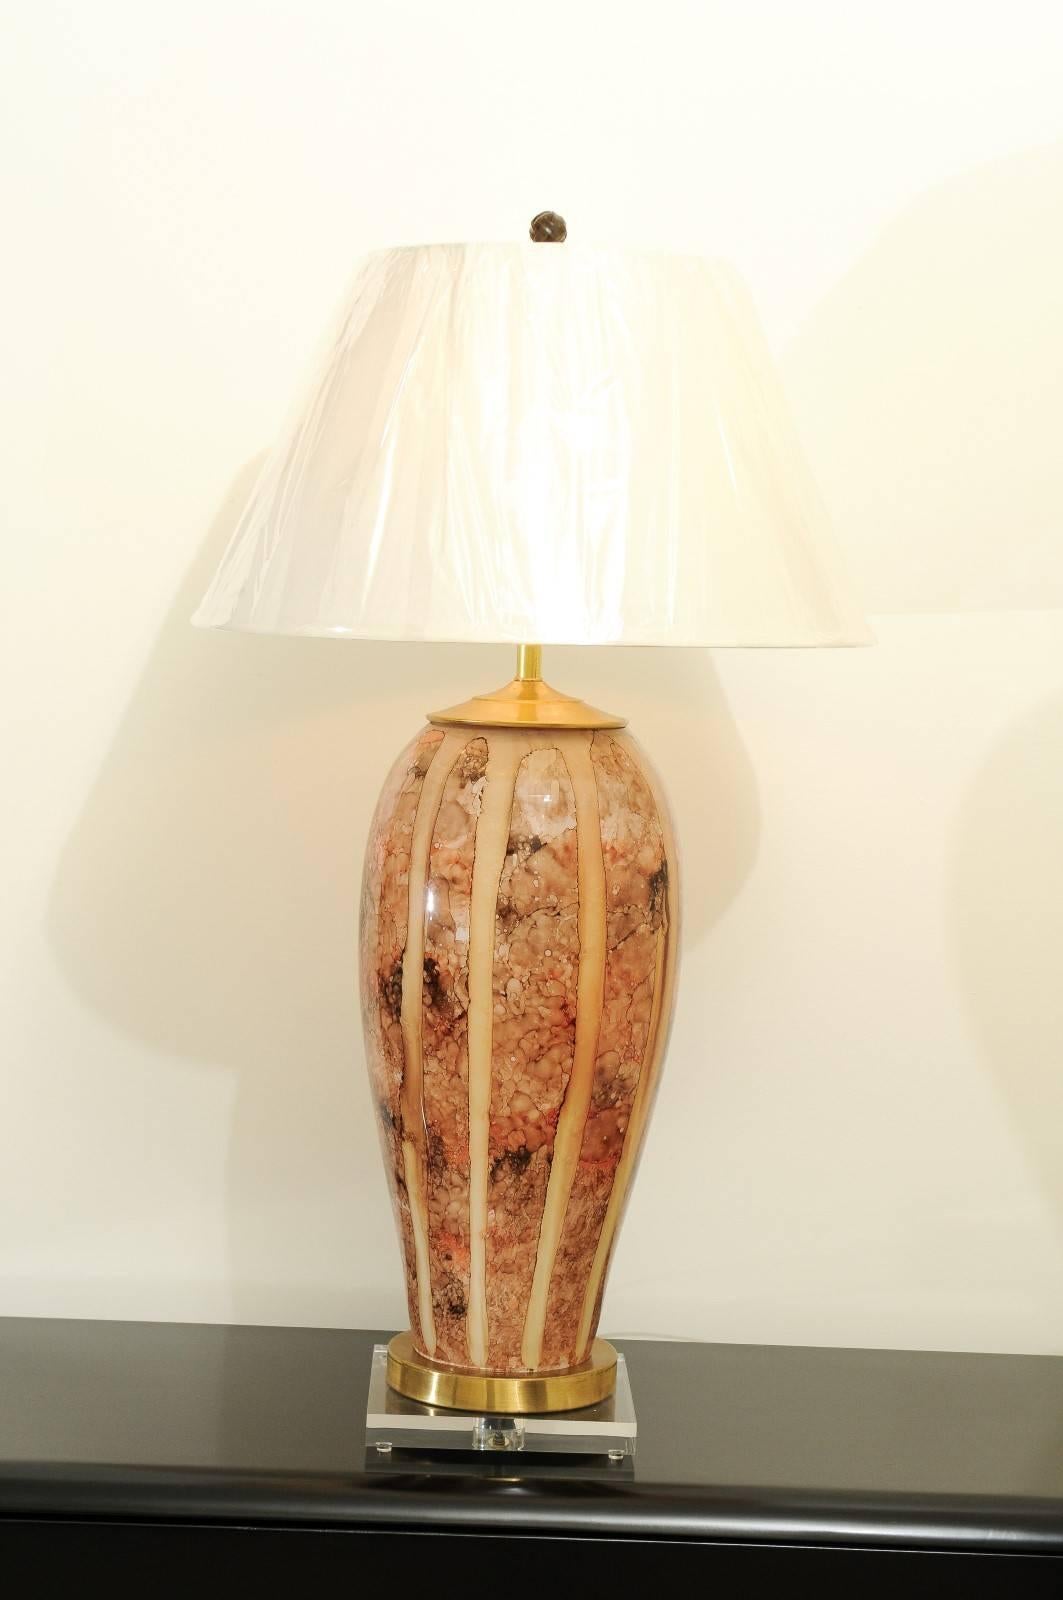 These magnificent lamps are shipped as photographed and described in the narrative. They have been custom built using materials of the highest quality and are shipped complete with the new shades, harps and finials shown in the photos.

A fabulous